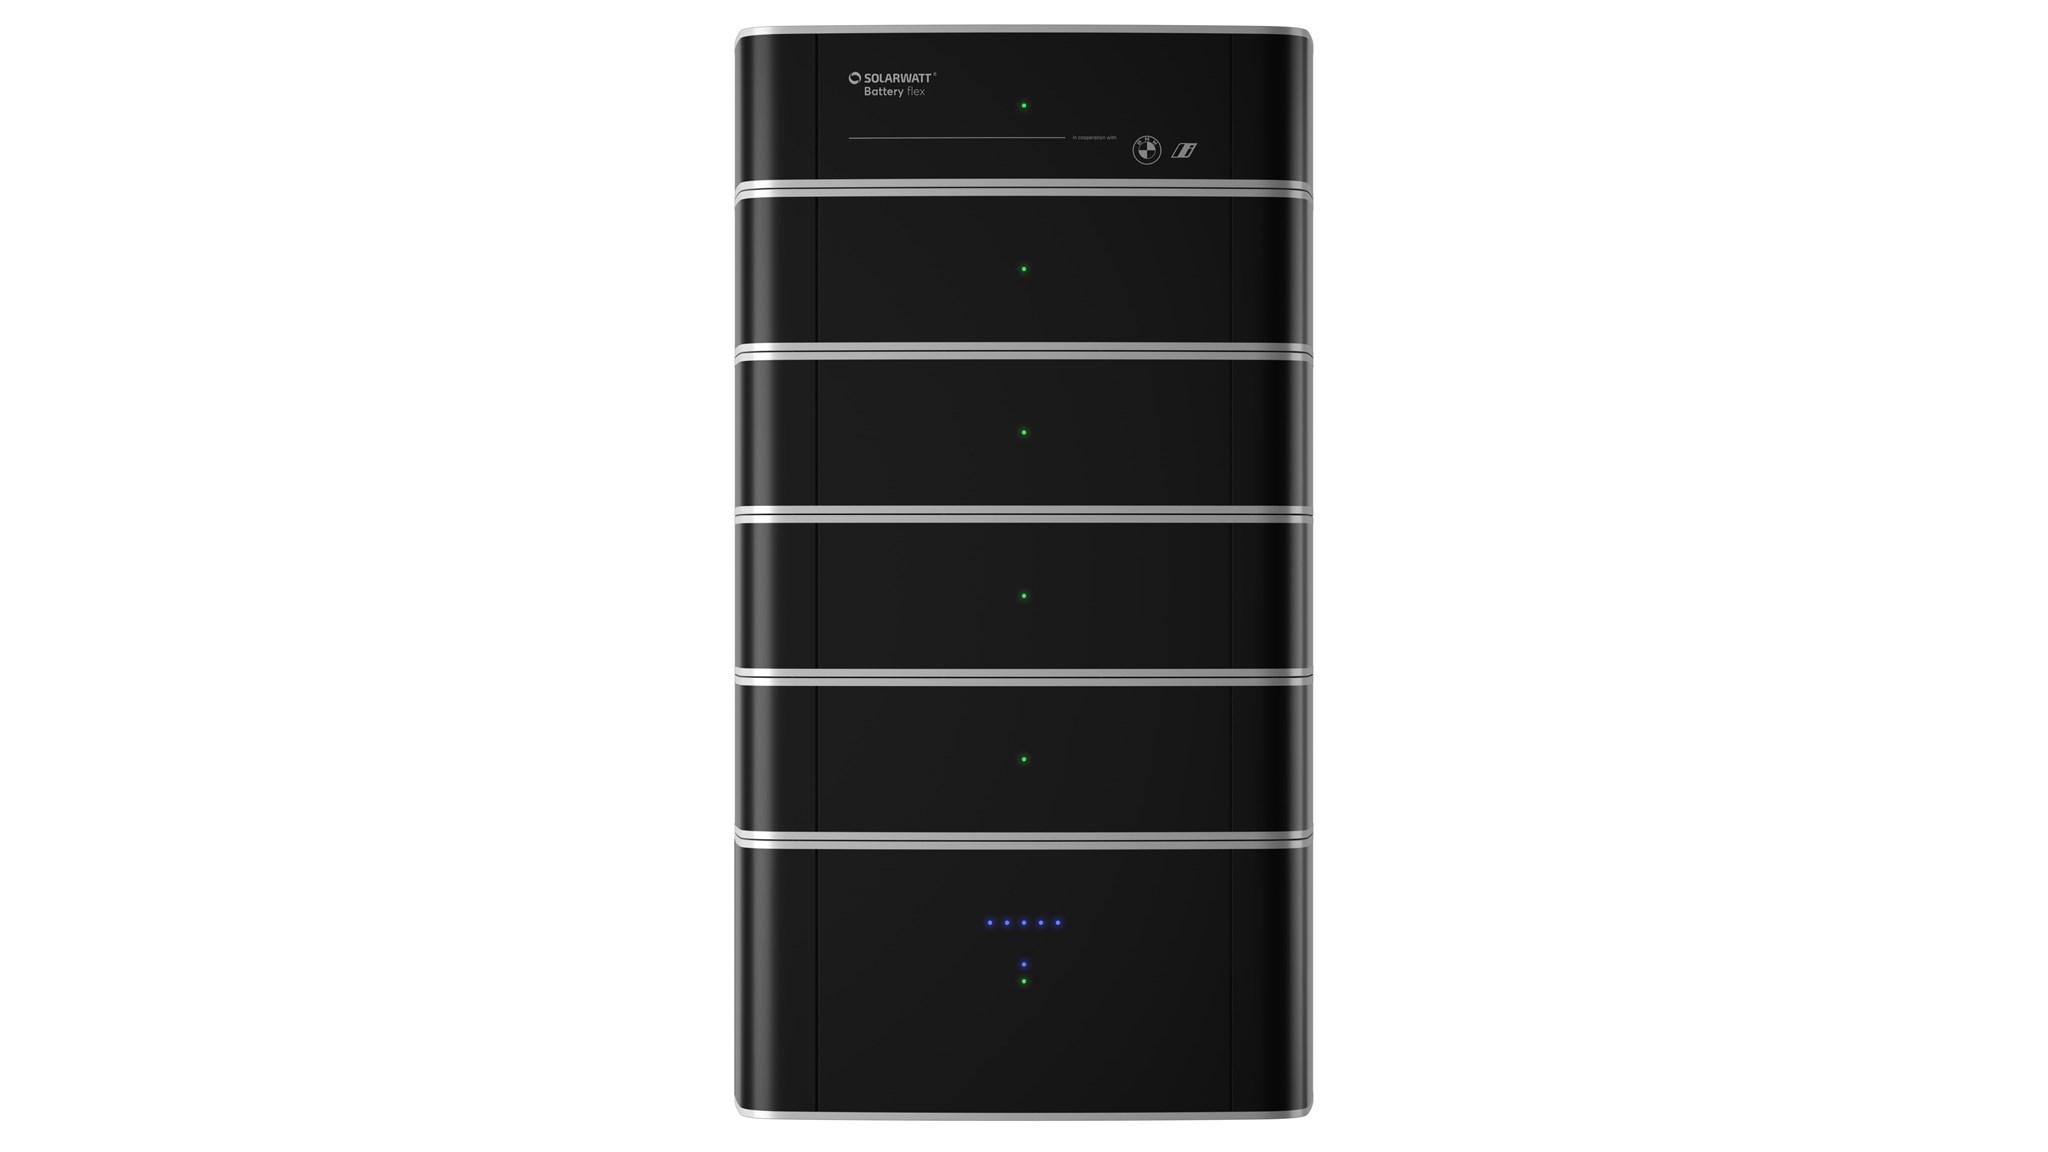 Picture of Solarwatt battery storage AC-1 1.3 - 12.0 kWh battery inverter, 1-phase, lithium-ion